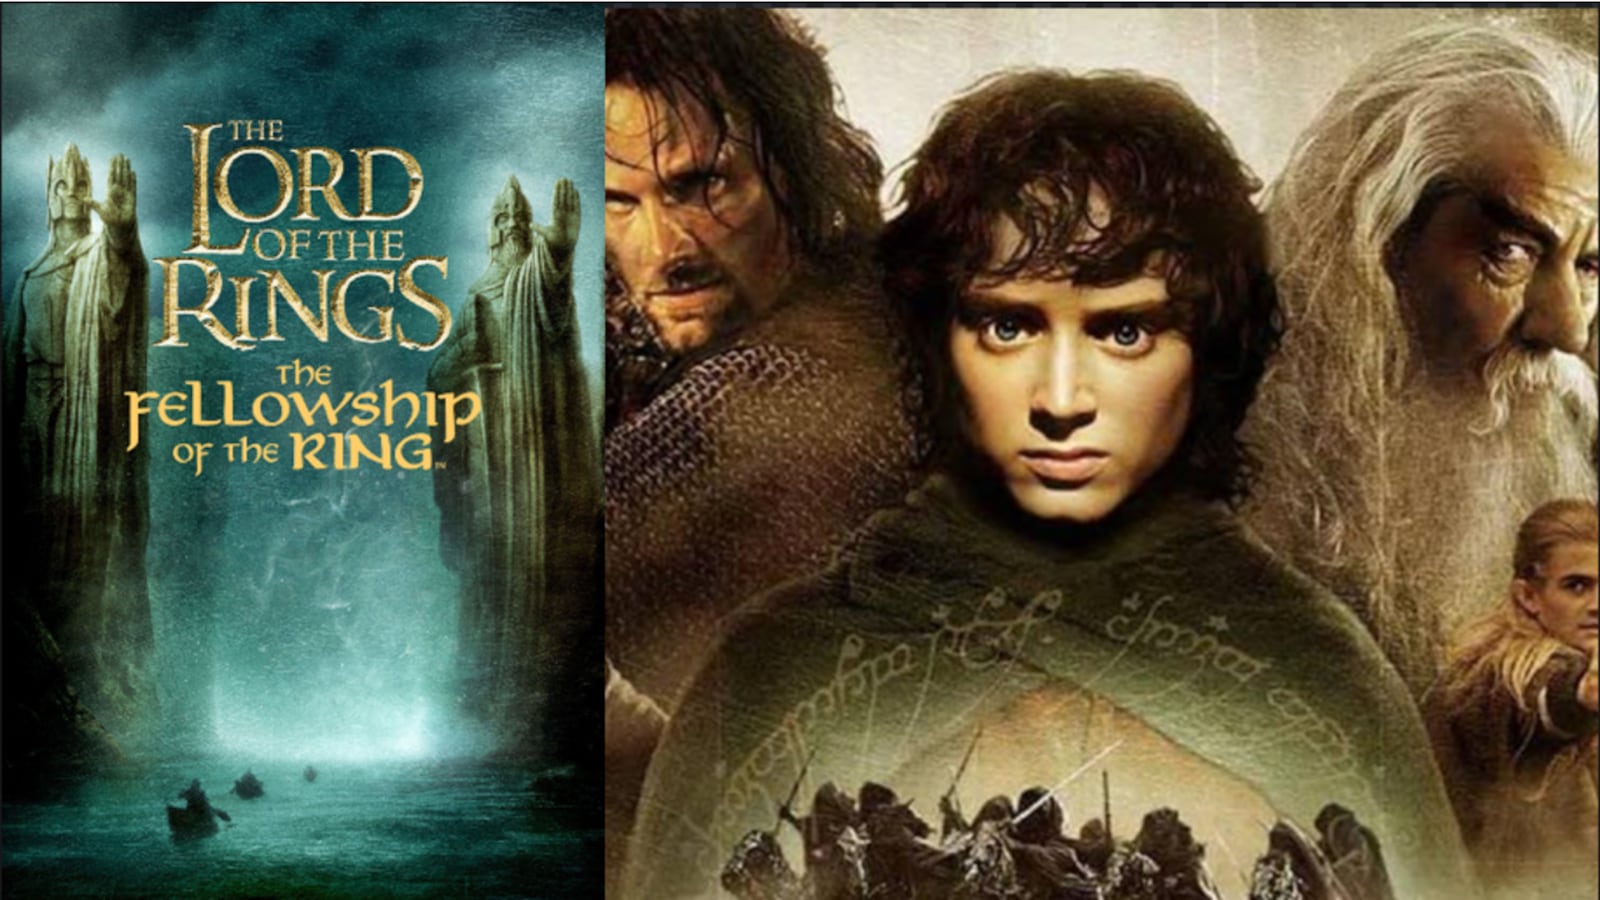 The Lord of the Rings: The Definitive Movie Posters (Insights